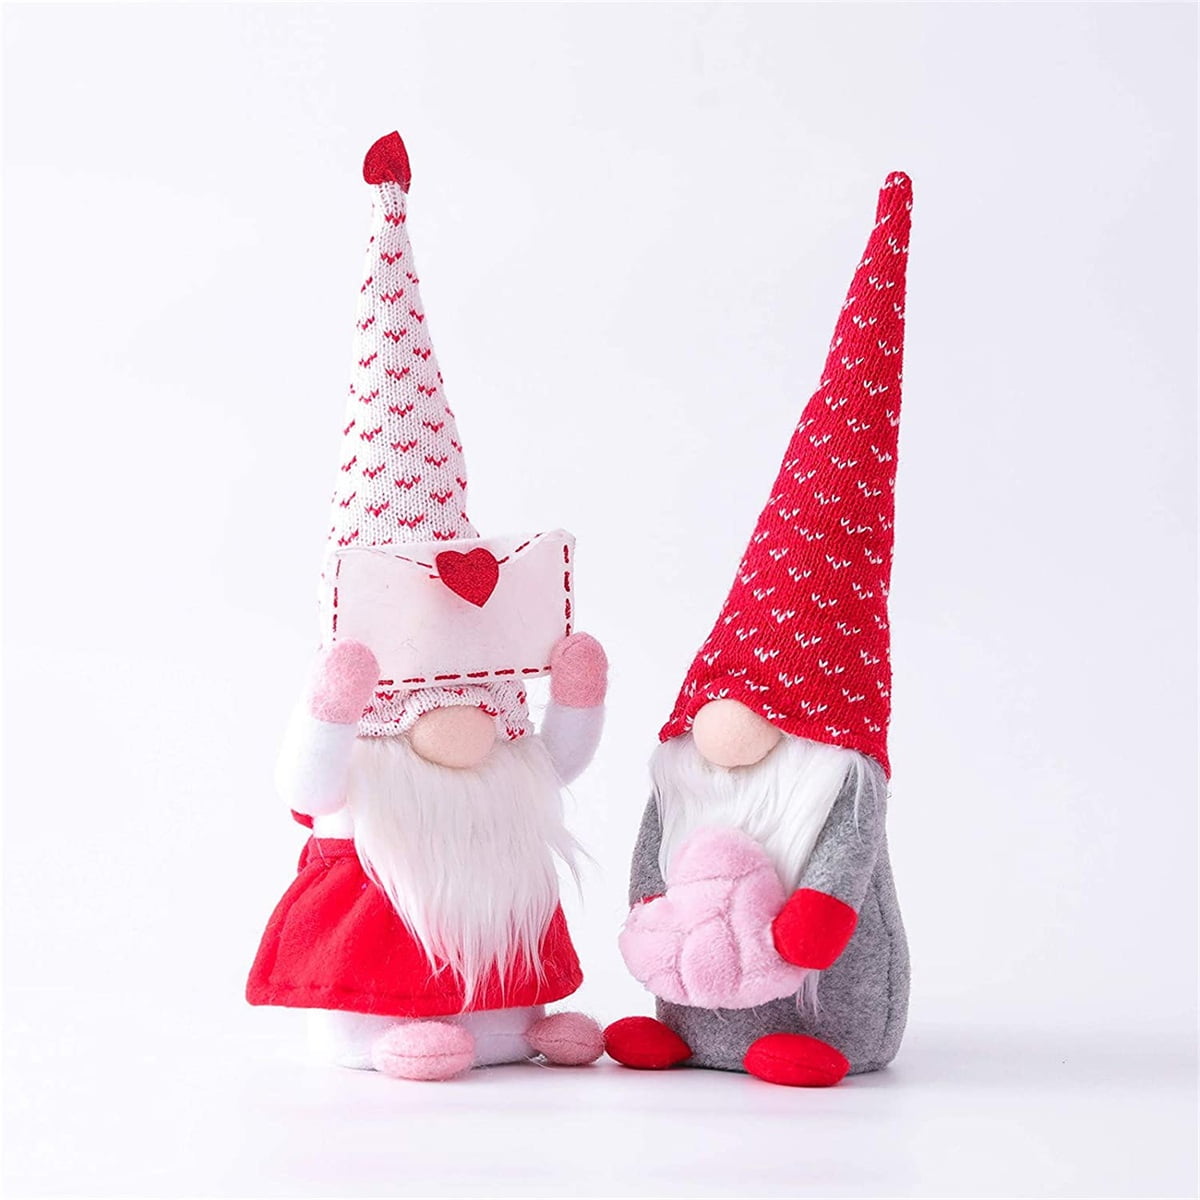 Valentines Day Table Top Decorations Plush Dolls,Mr and Mrs Gnome Dolls Faceless Santa Doll Elf Ornaments Home Decoration,Sweet Valentines Stuffed Toy Gifts S, 2PC 